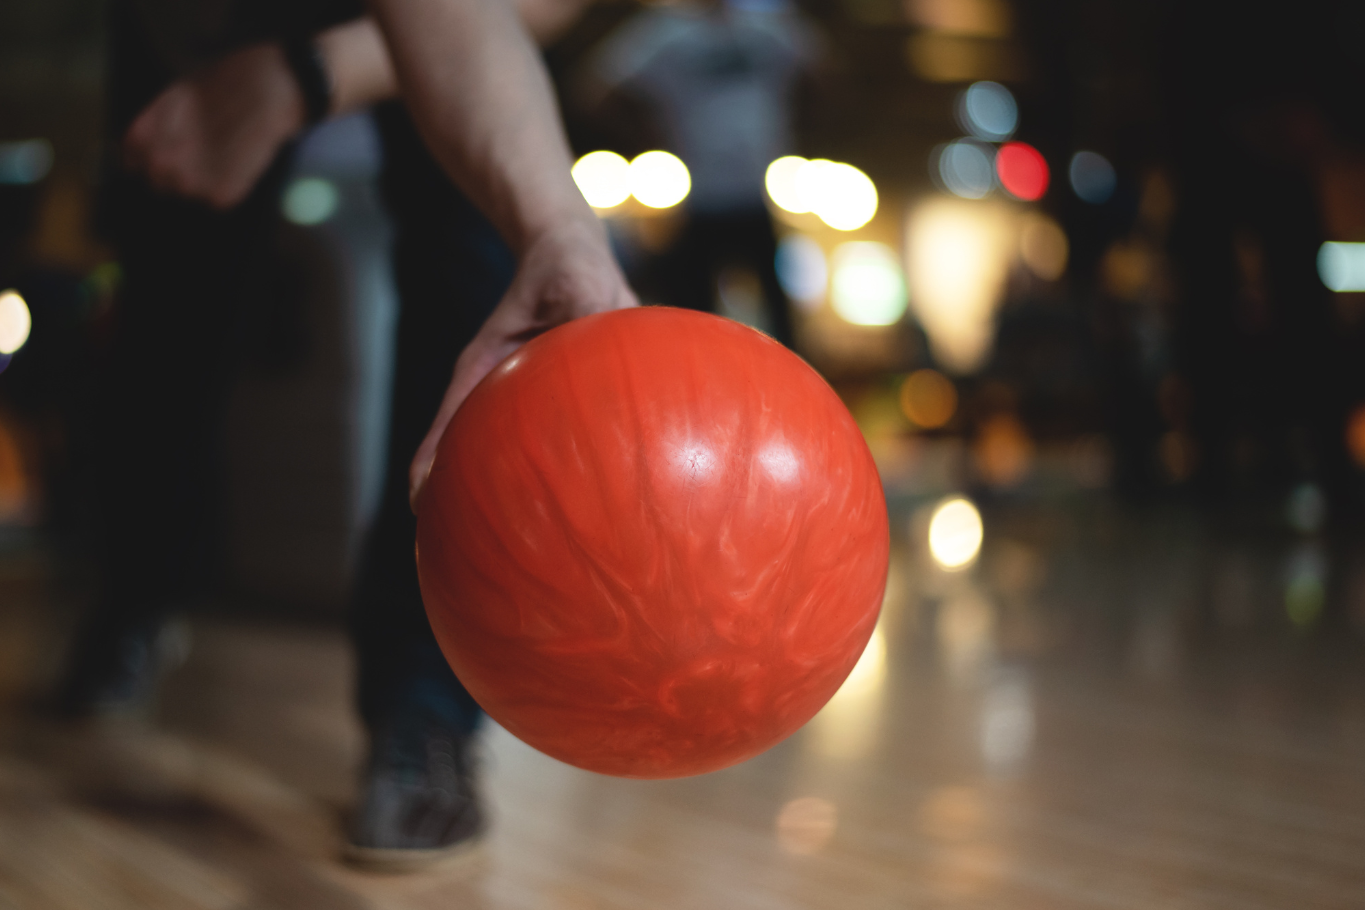 A figure is holding a bowling ball to throw